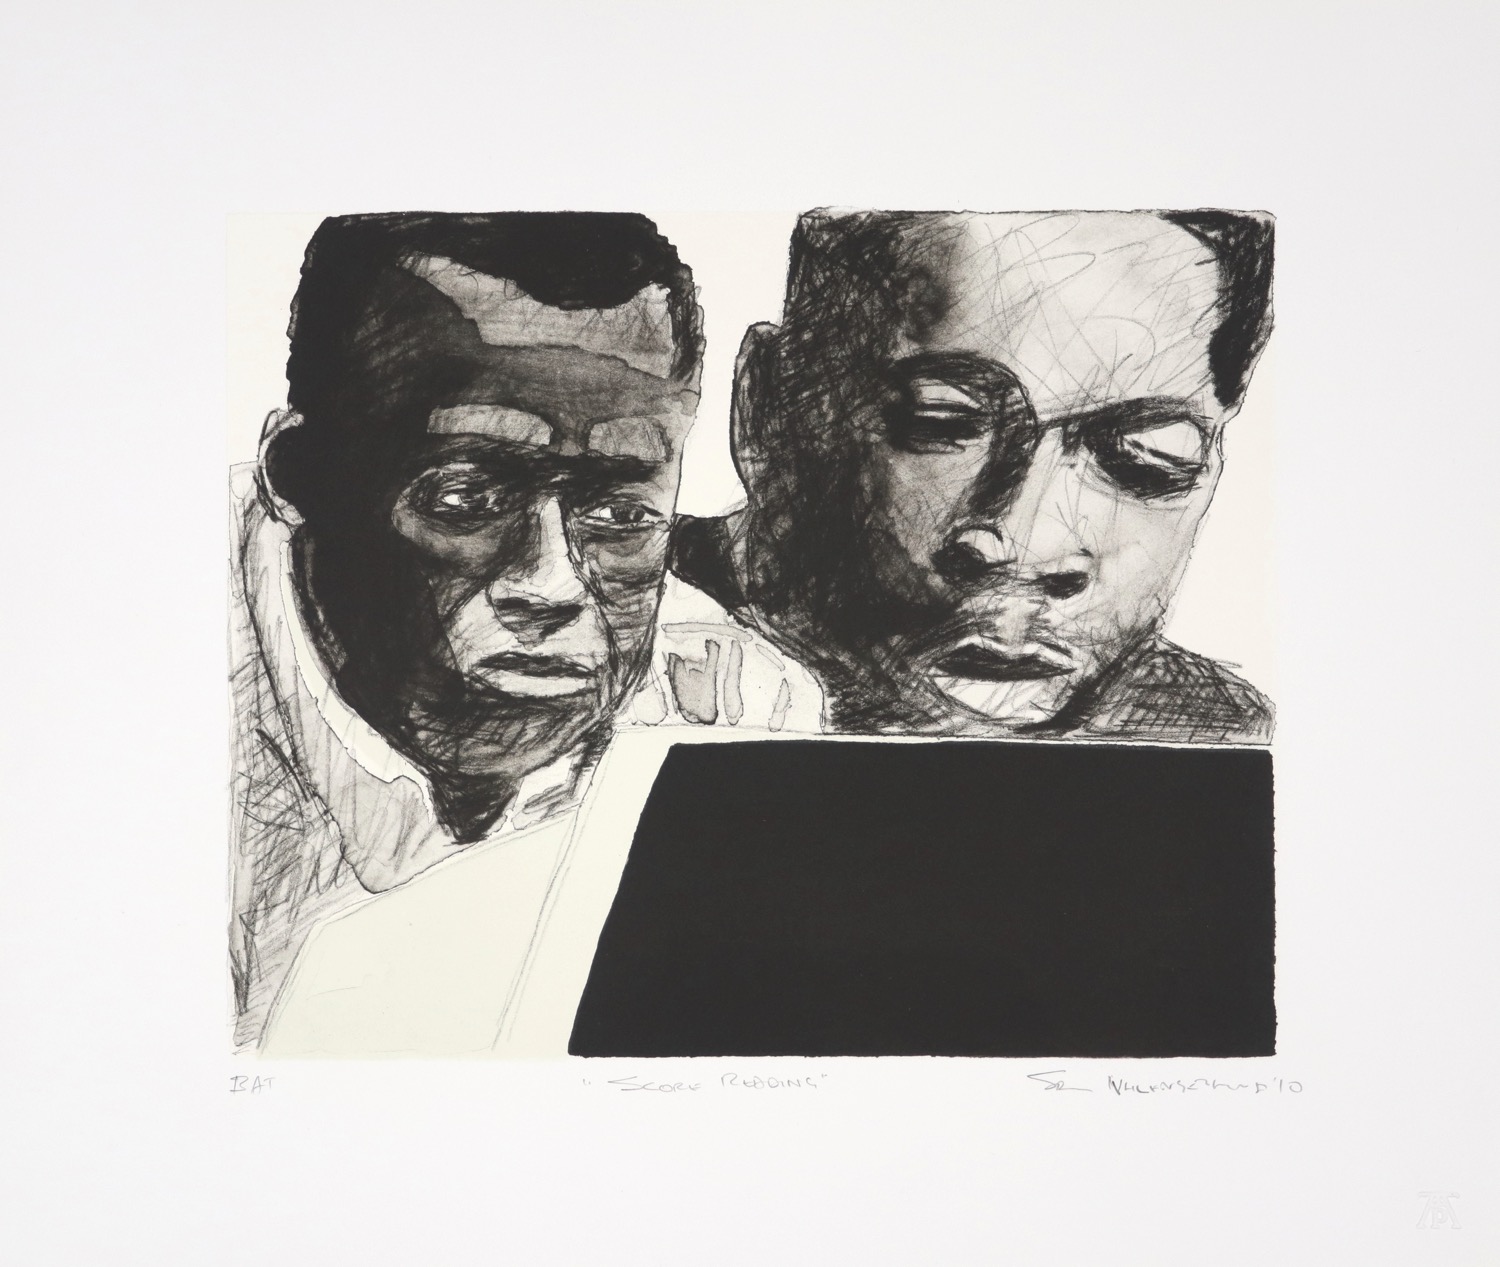 Lithograph of two men's heads behind music score.